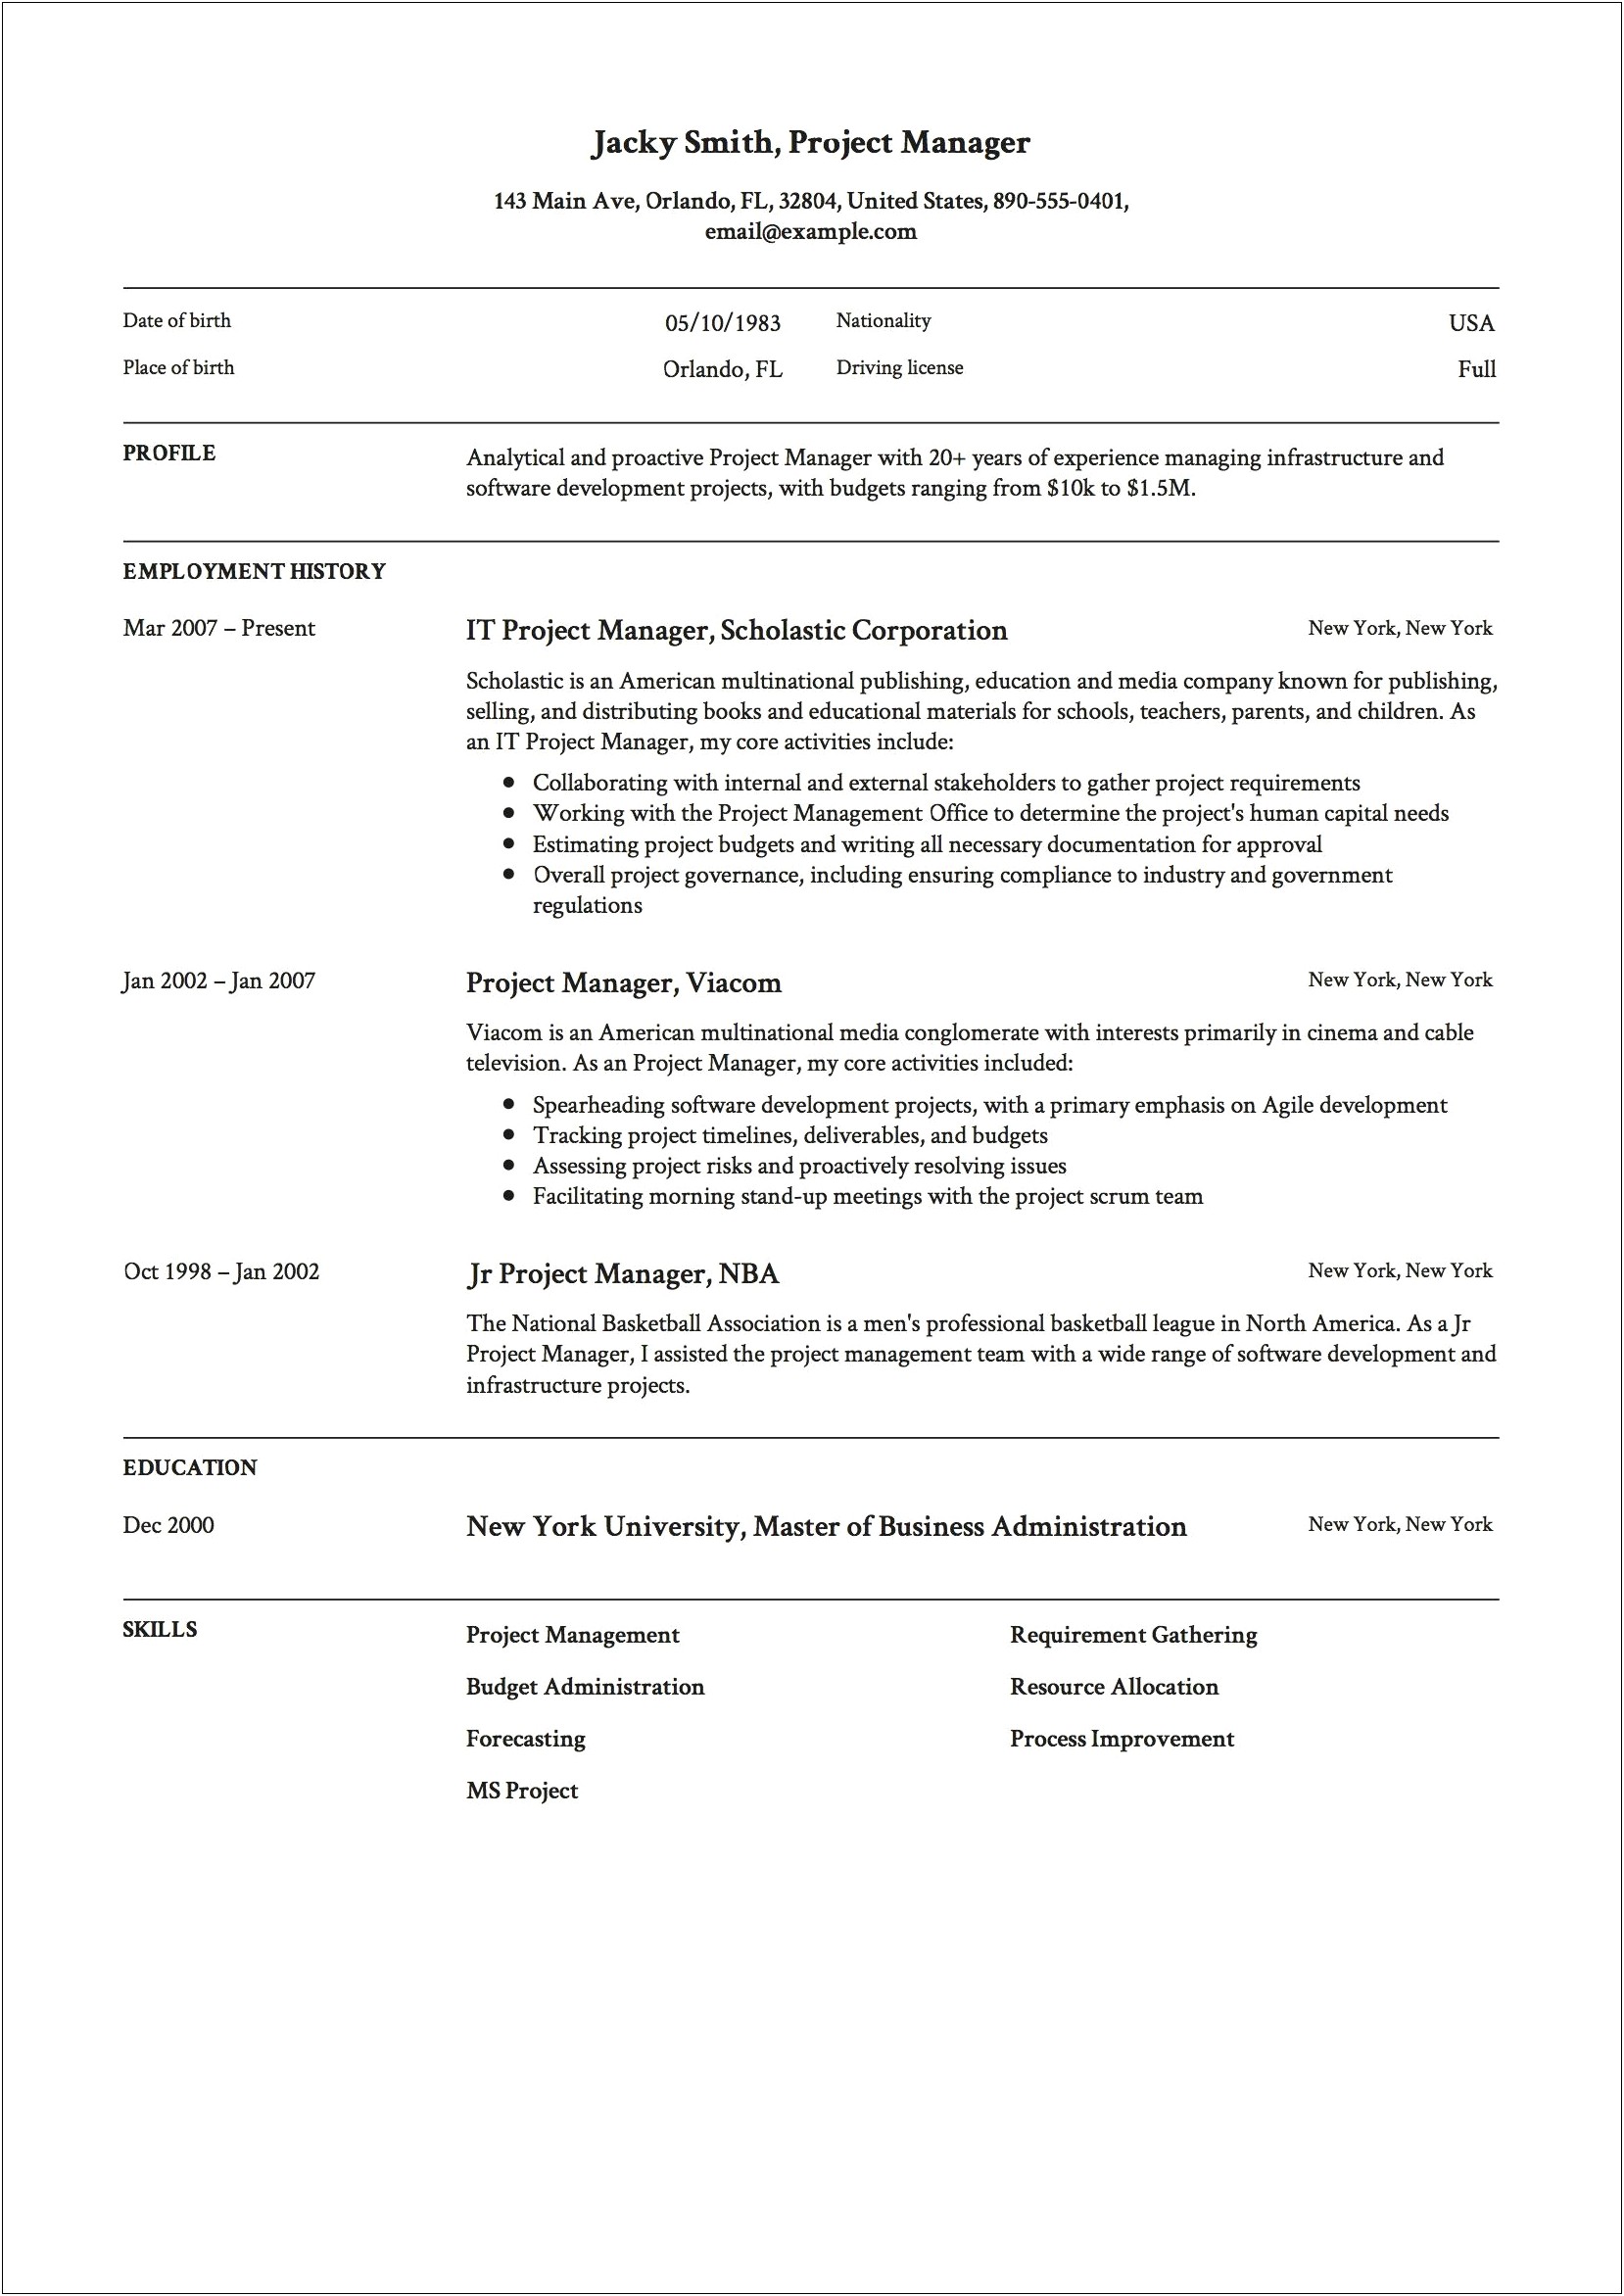 Resume Templates With Work Experiene And Project Work